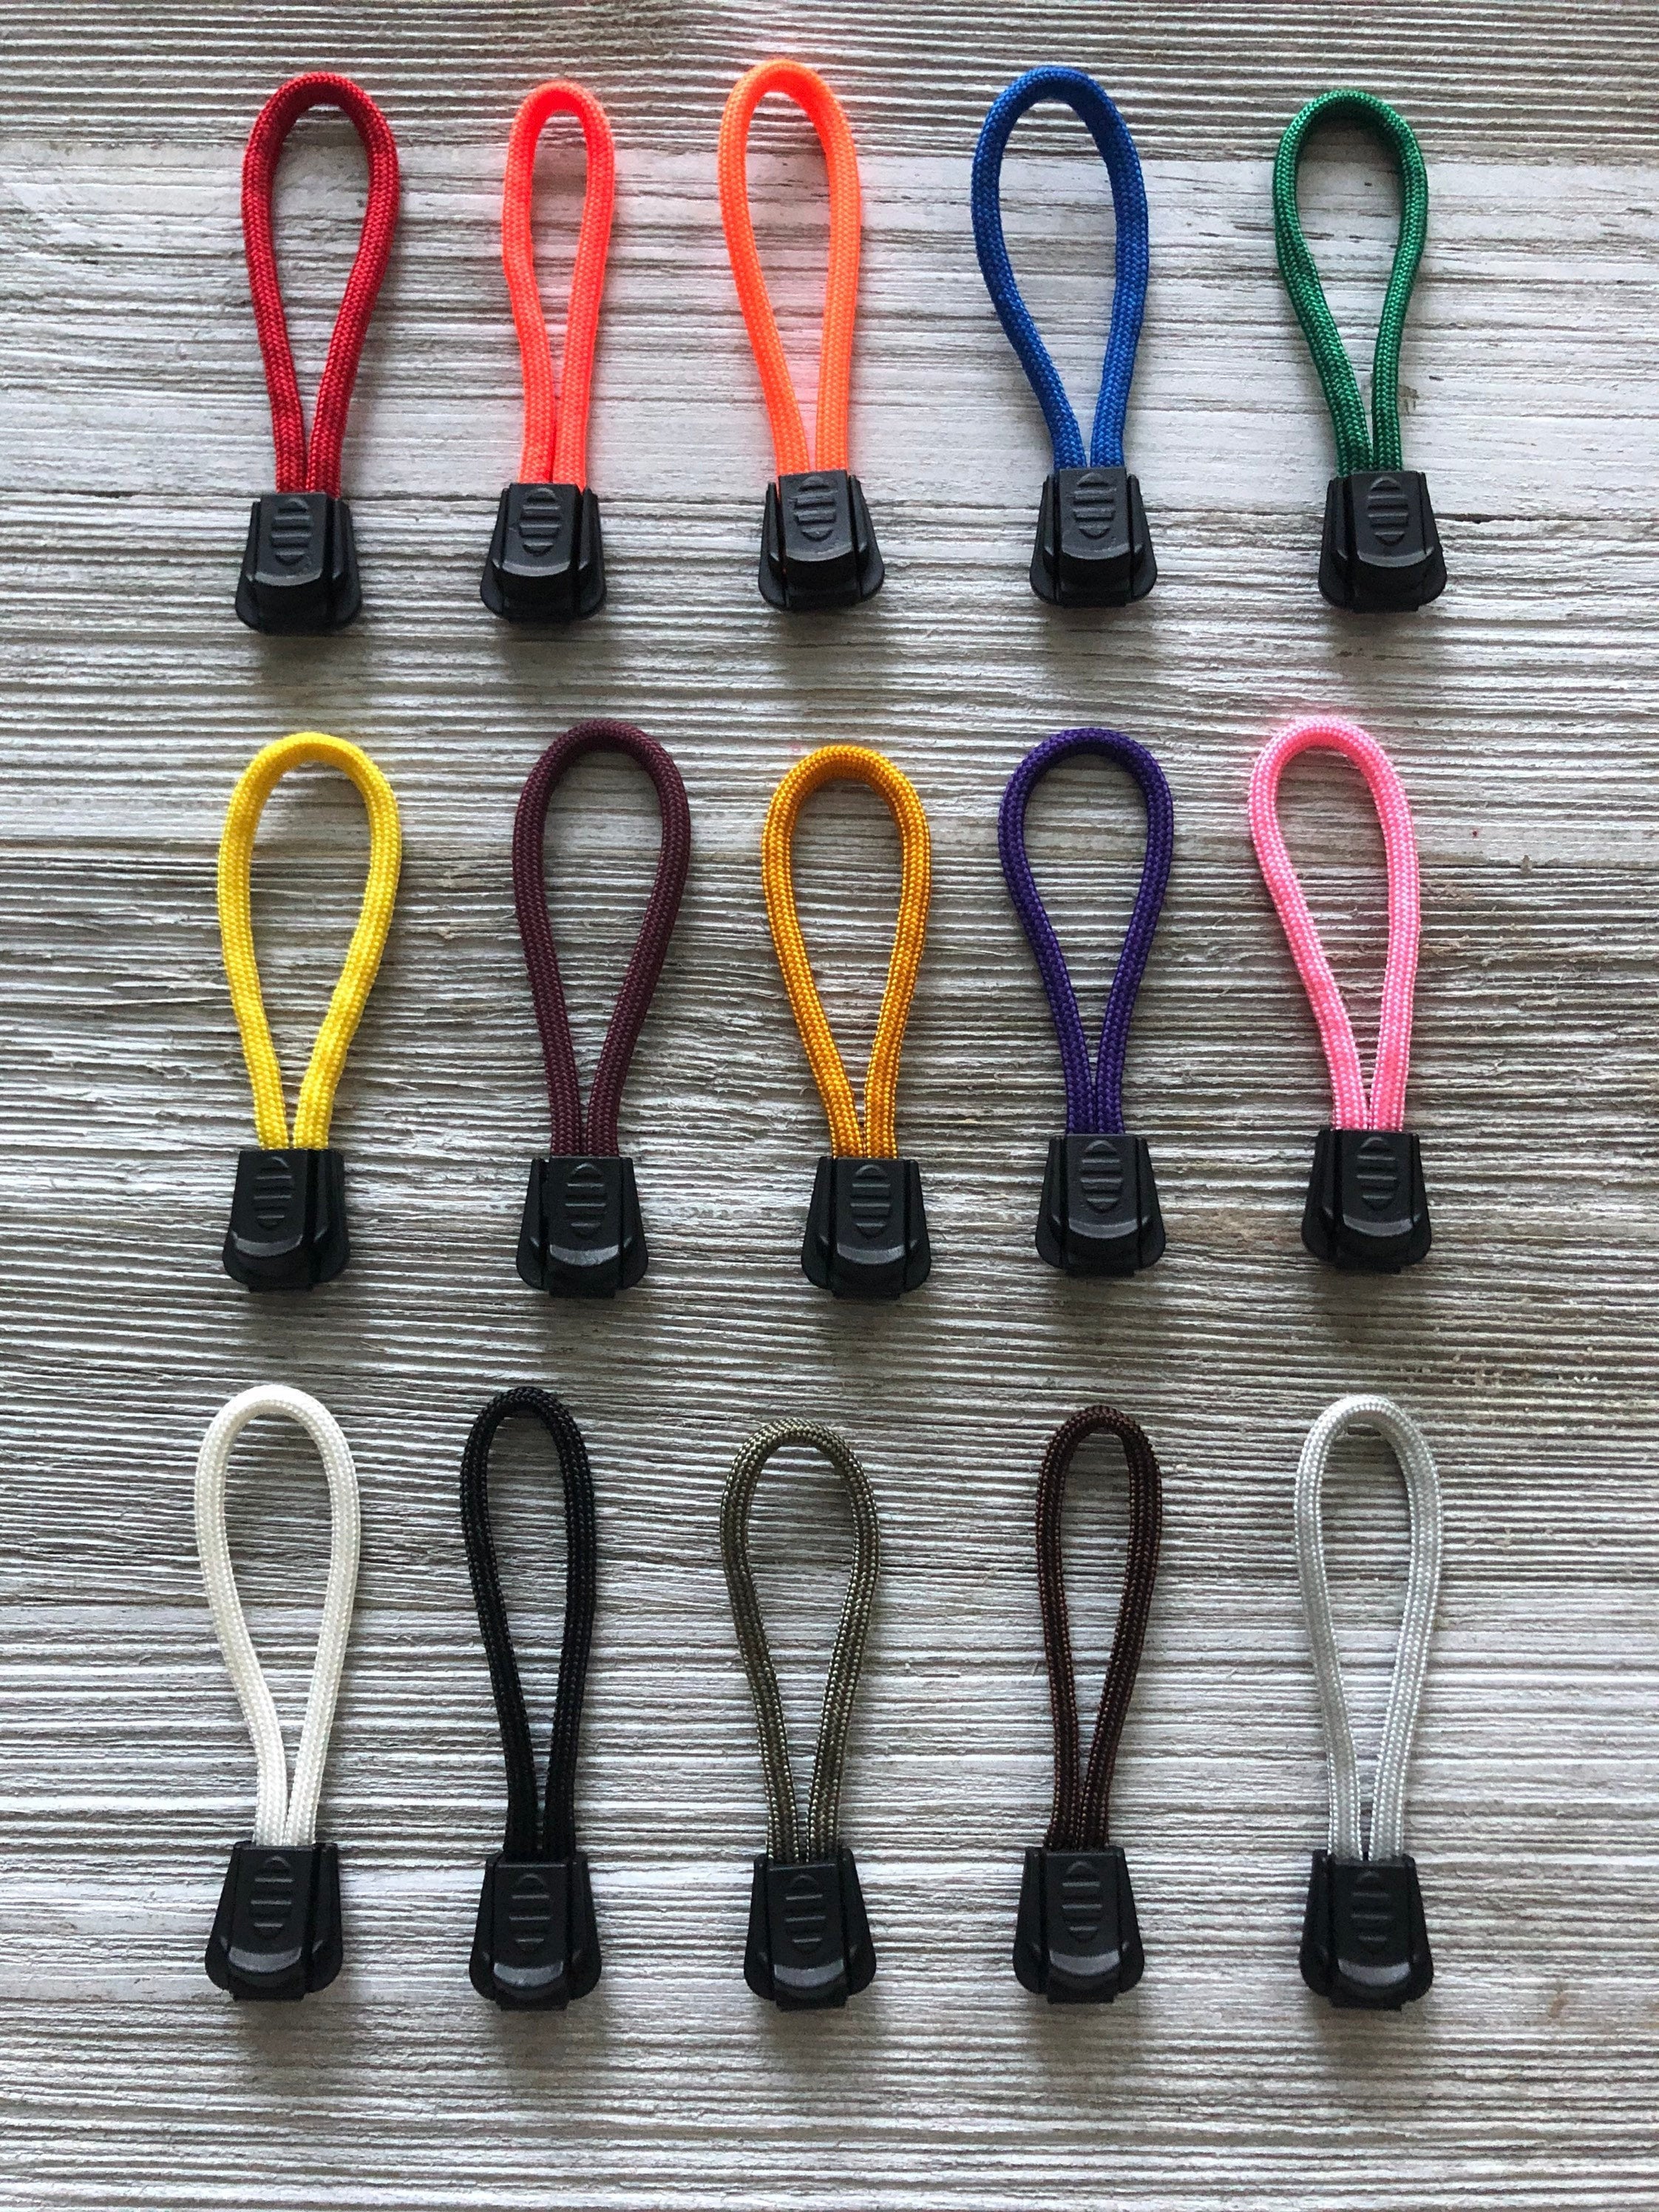 100 Replacement Zipper Pull Tab Pullers for Jackets Backpacks Purses Luggage